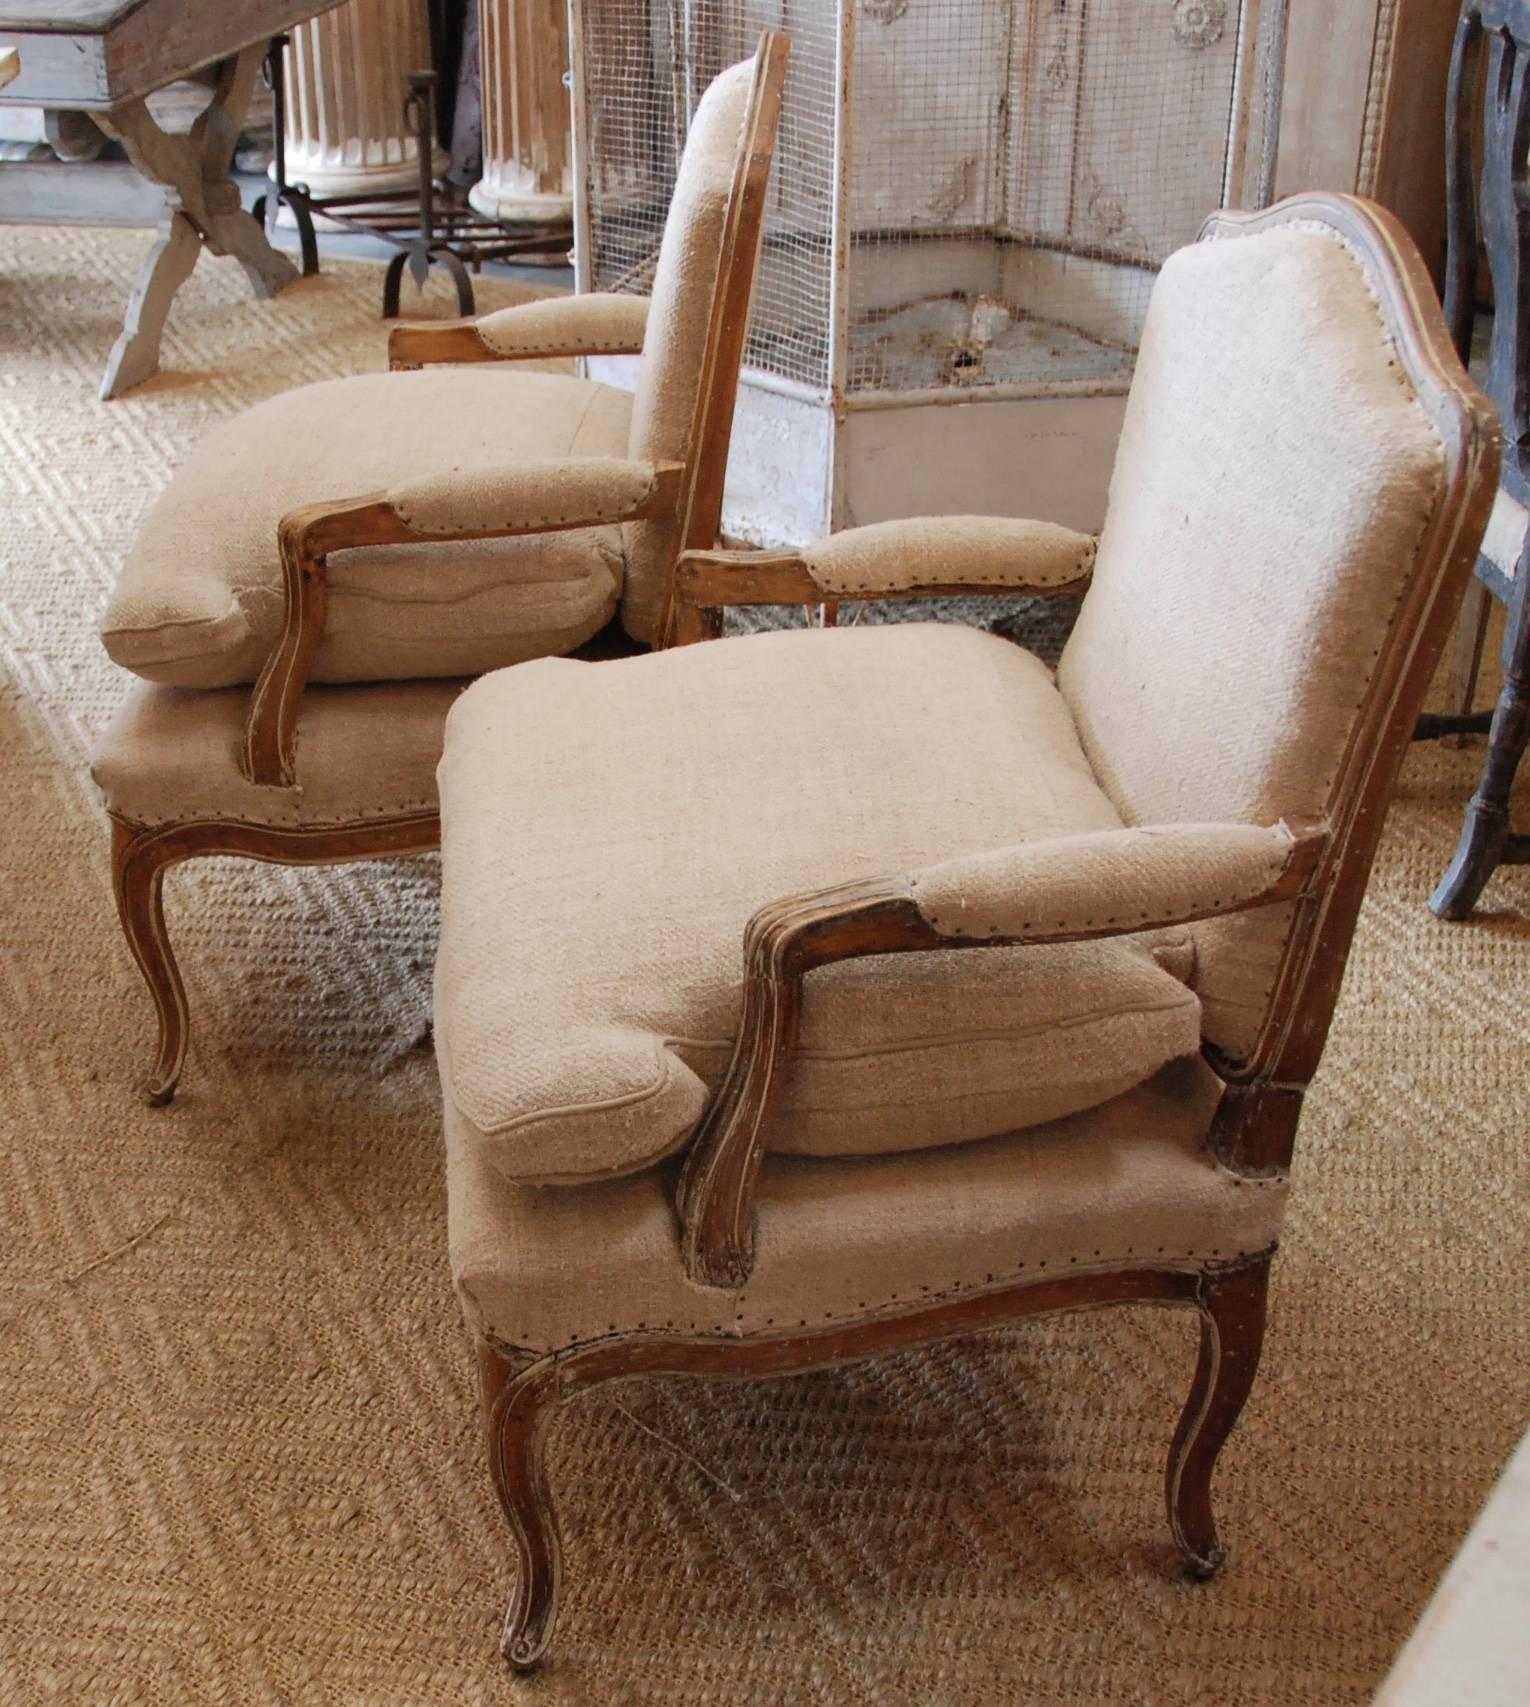 A pair of 19th century French bergère chairs stripped down to lovely aged pine patina. Upholstered in French antique hemp. Sturdy and comfortable.
 